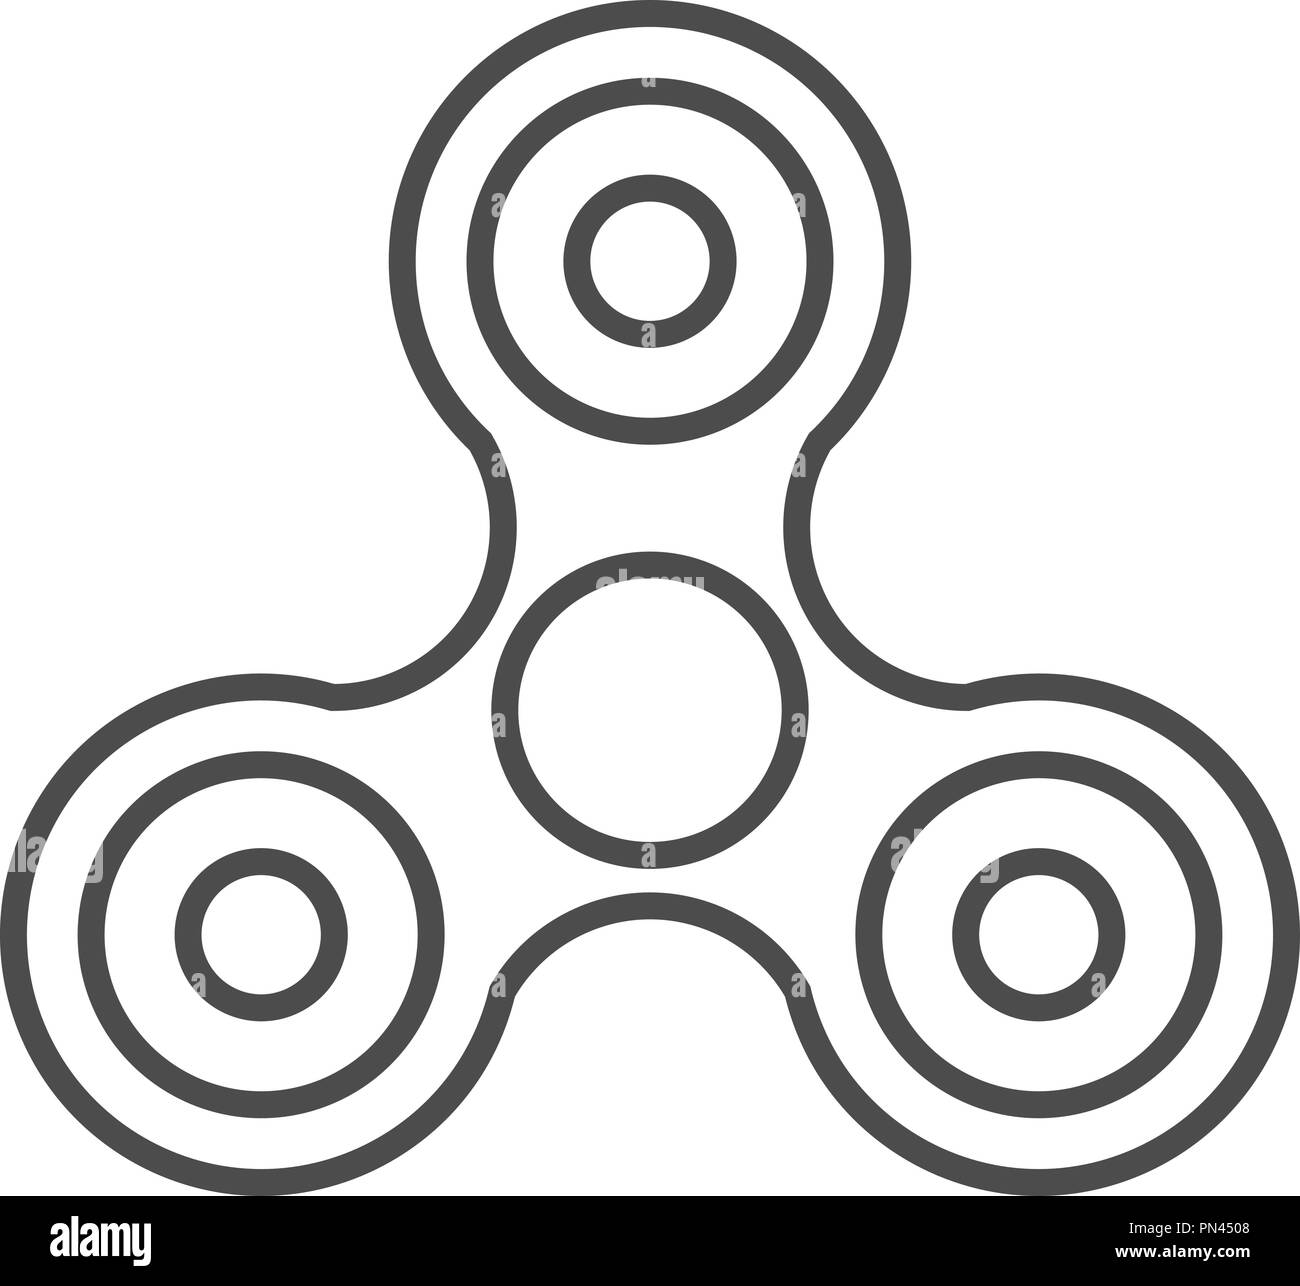 Fidget spinner Black and White Stock Photos & Images - Alamy